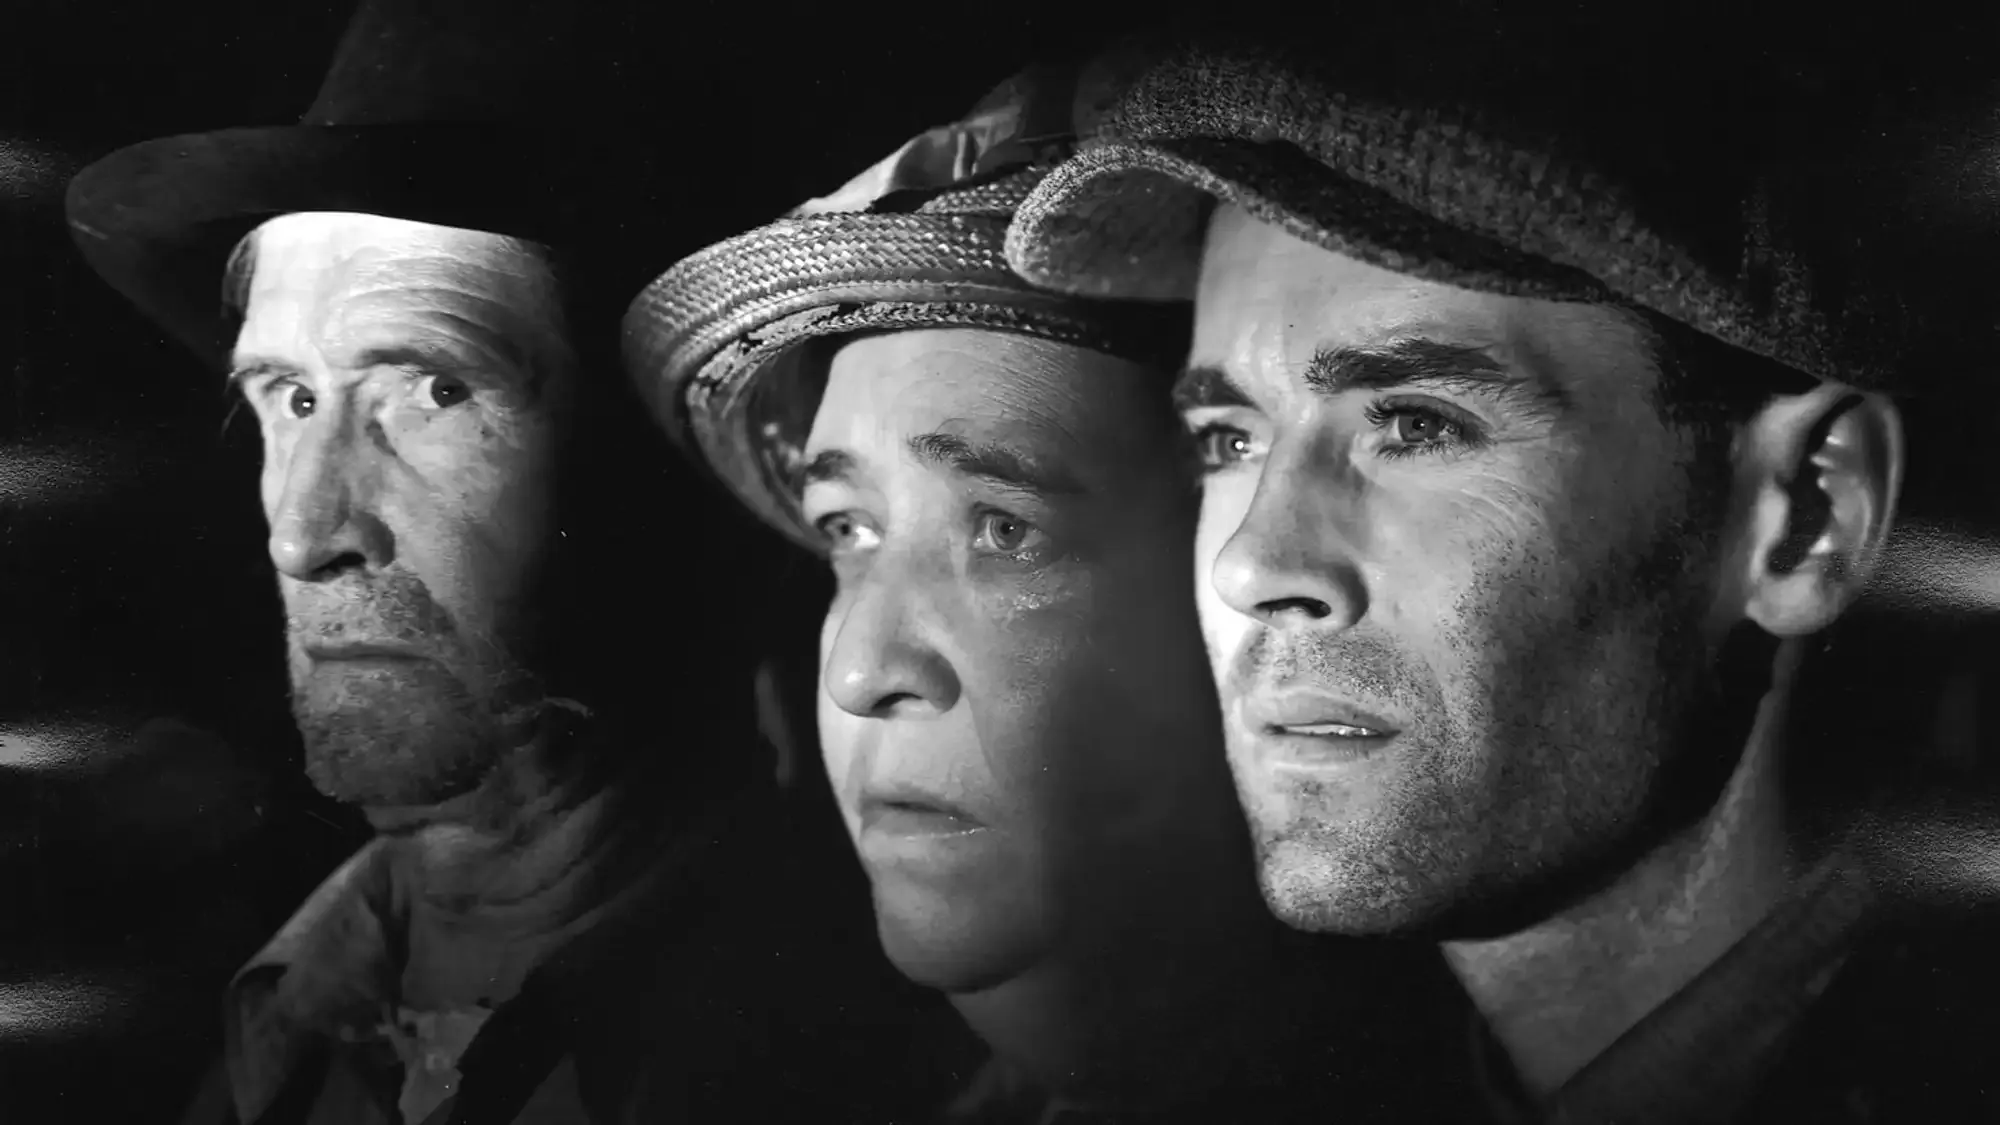 The Grapes of Wrath movie review